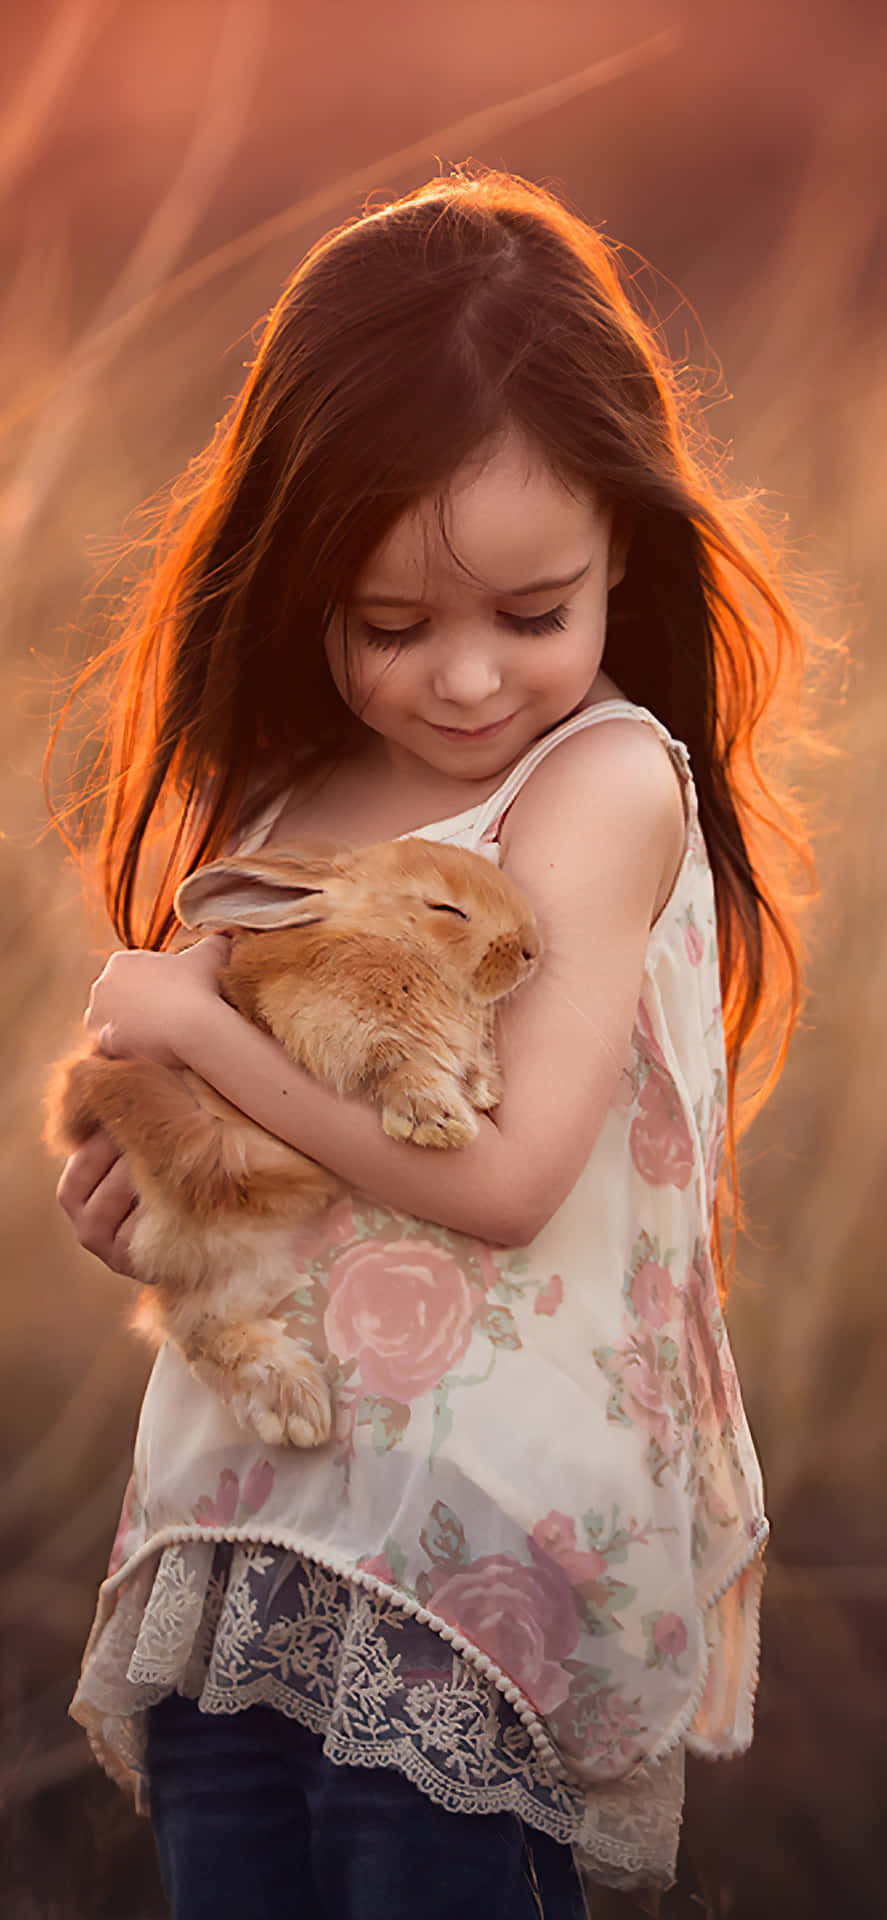 A Little Girl Holding A Rabbit In The Field Wallpaper